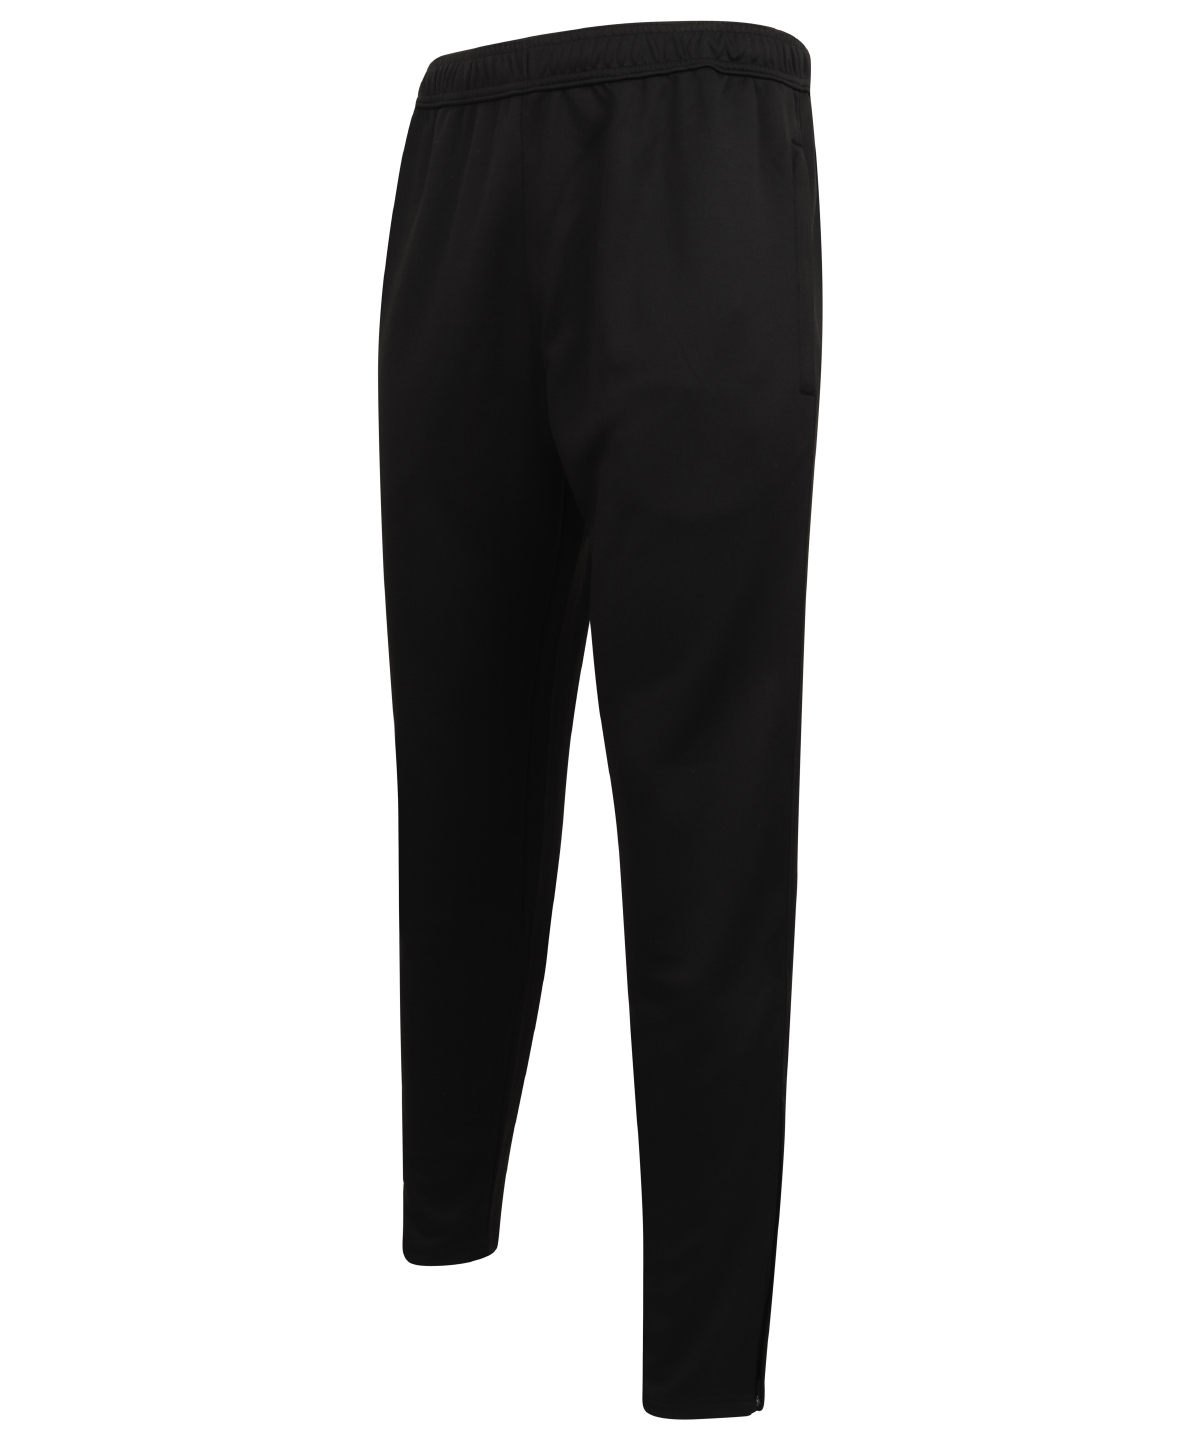 Knitted Tracksuit Pants Black Size 2XLarge